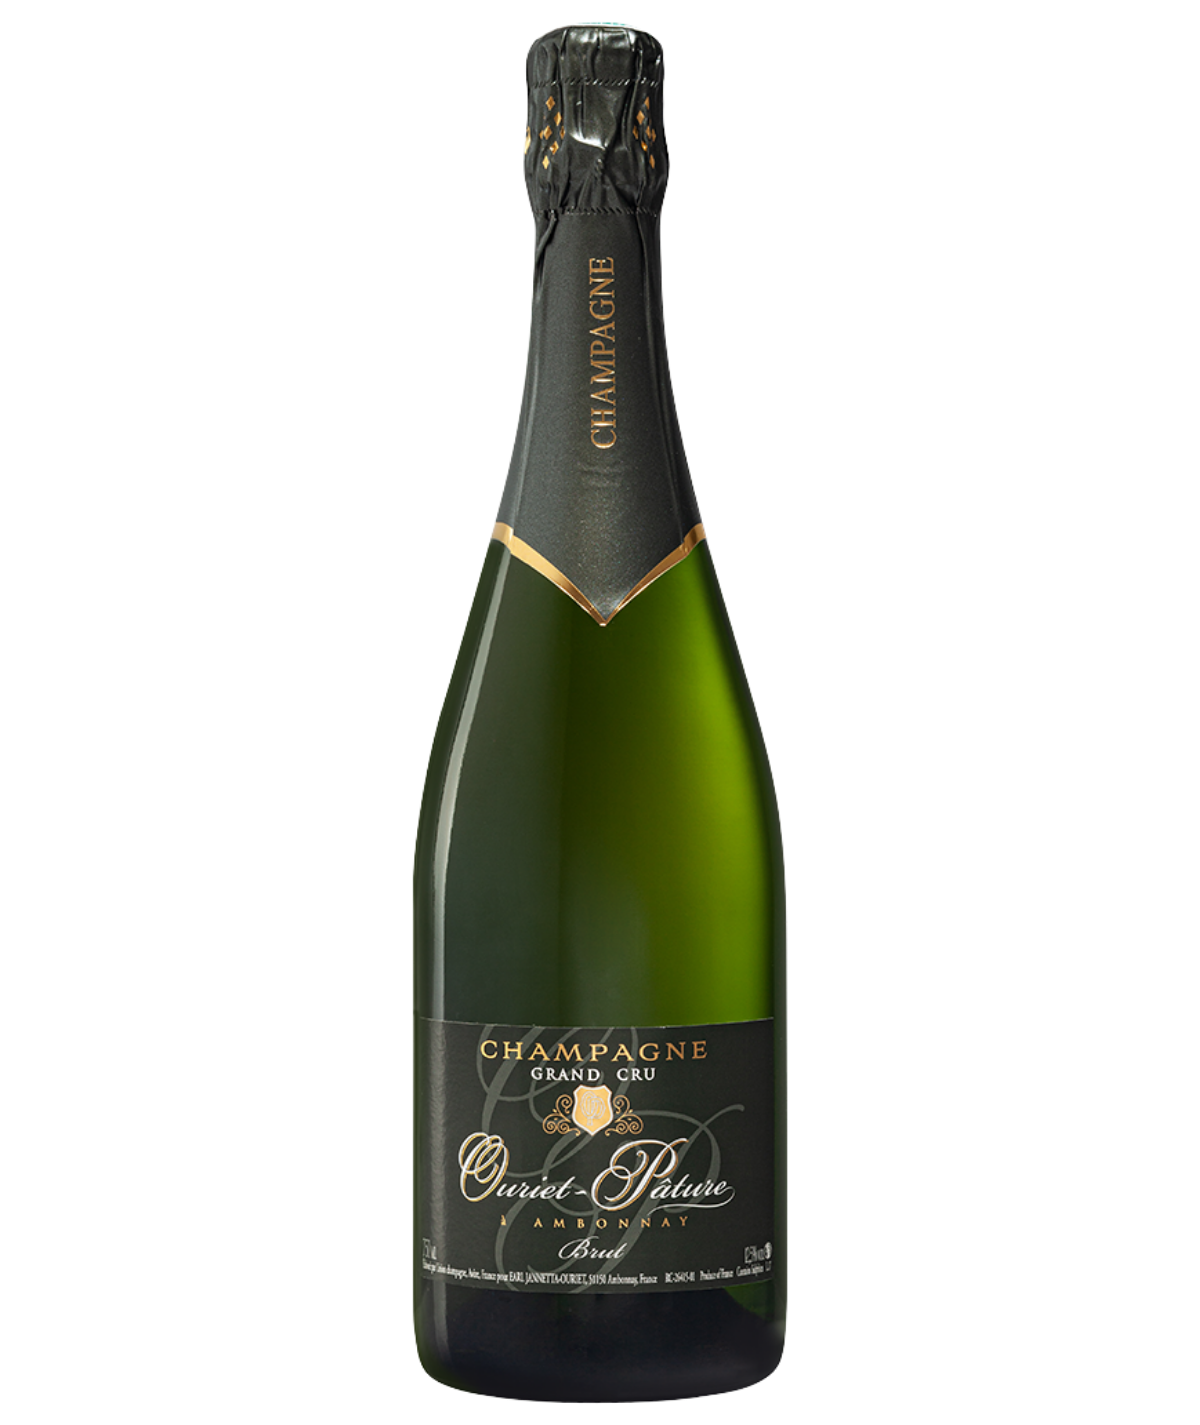 OURIET-PATURE champagne Tradition Grand Cru